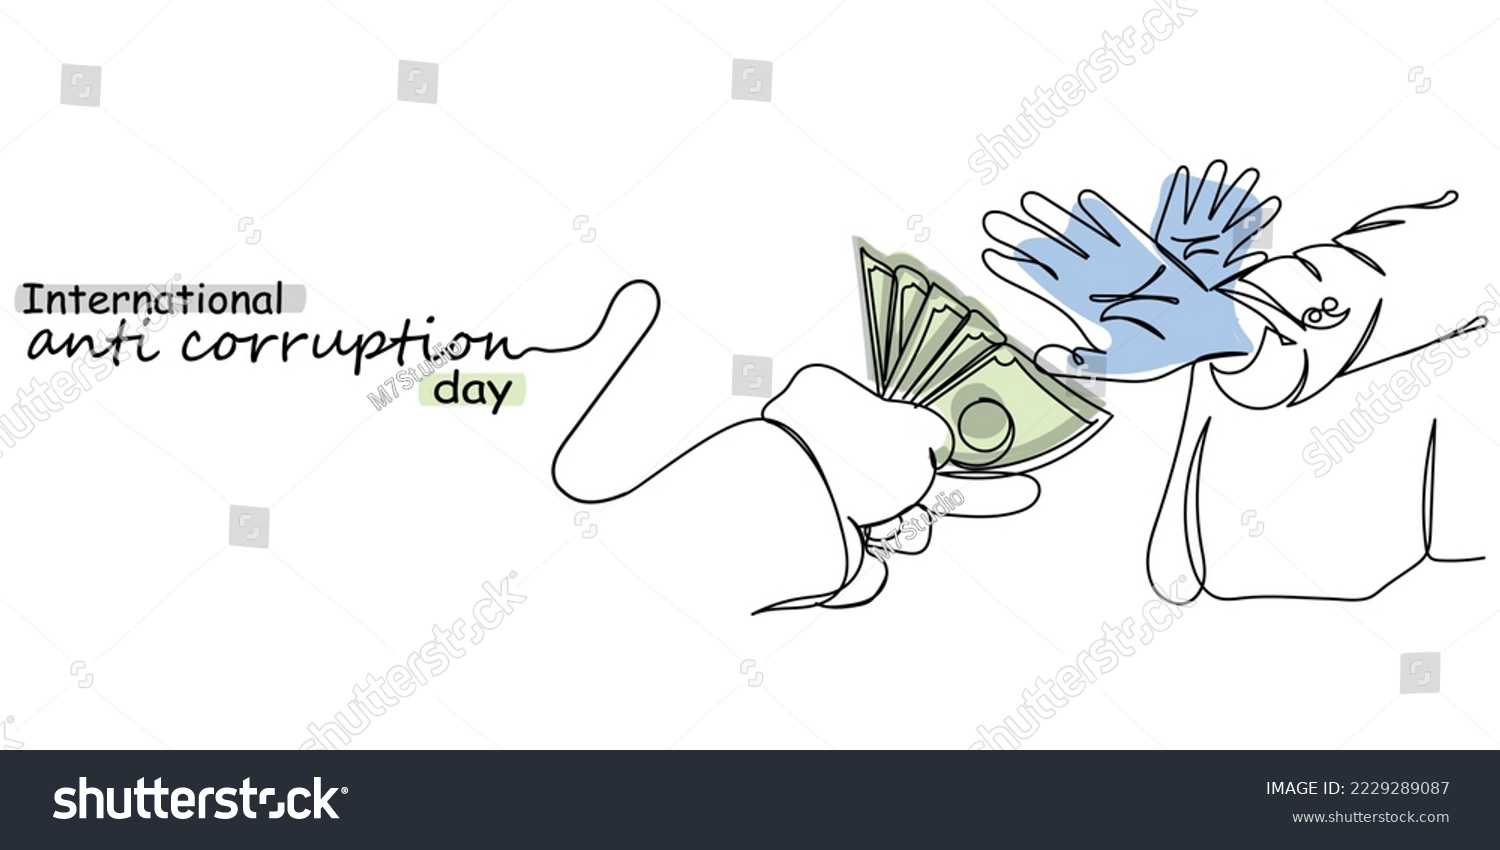 SVG of International Anti corruption day. Bribery is a criminal offense. Say no to corruption. Raise your voice against injustice. Continuous line art vector svg